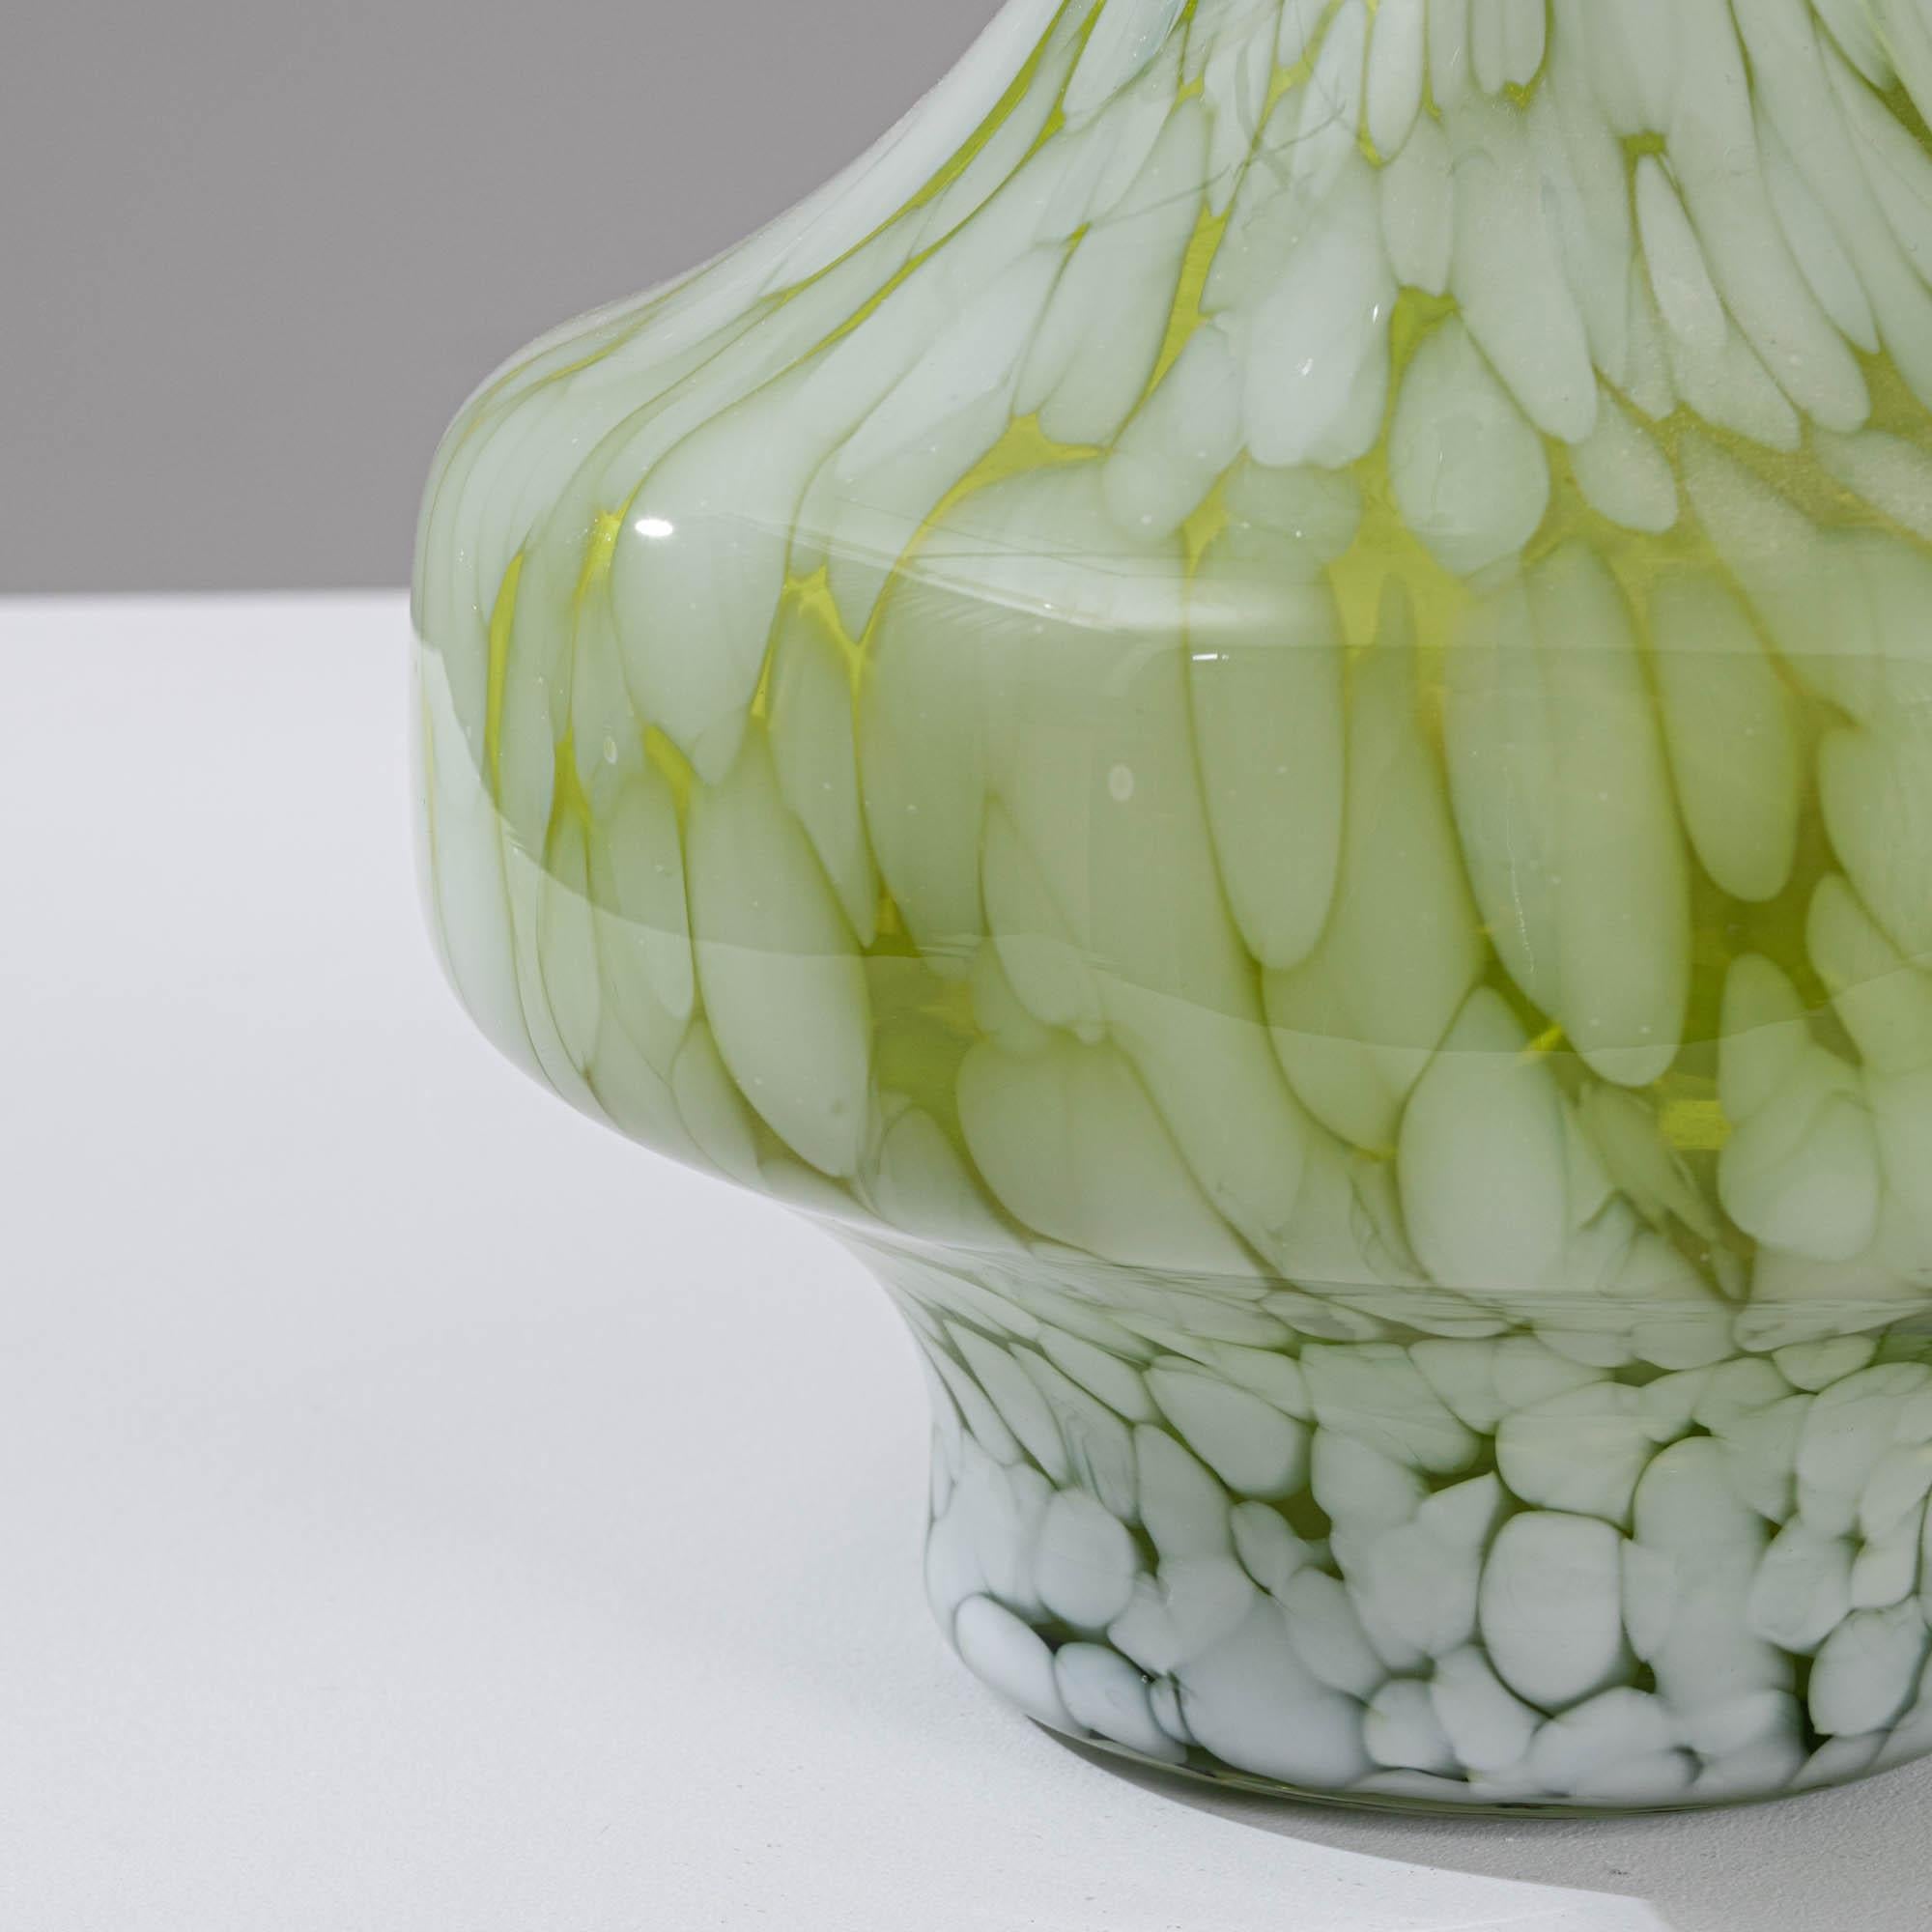 Elevate your décor with this exquisite 20th-century French Green Glass Vase. The lush green hue exudes a timeless elegance, enhanced by delicate white confetti melts gracefully dispersed across the surface. This striking vase is designed with a